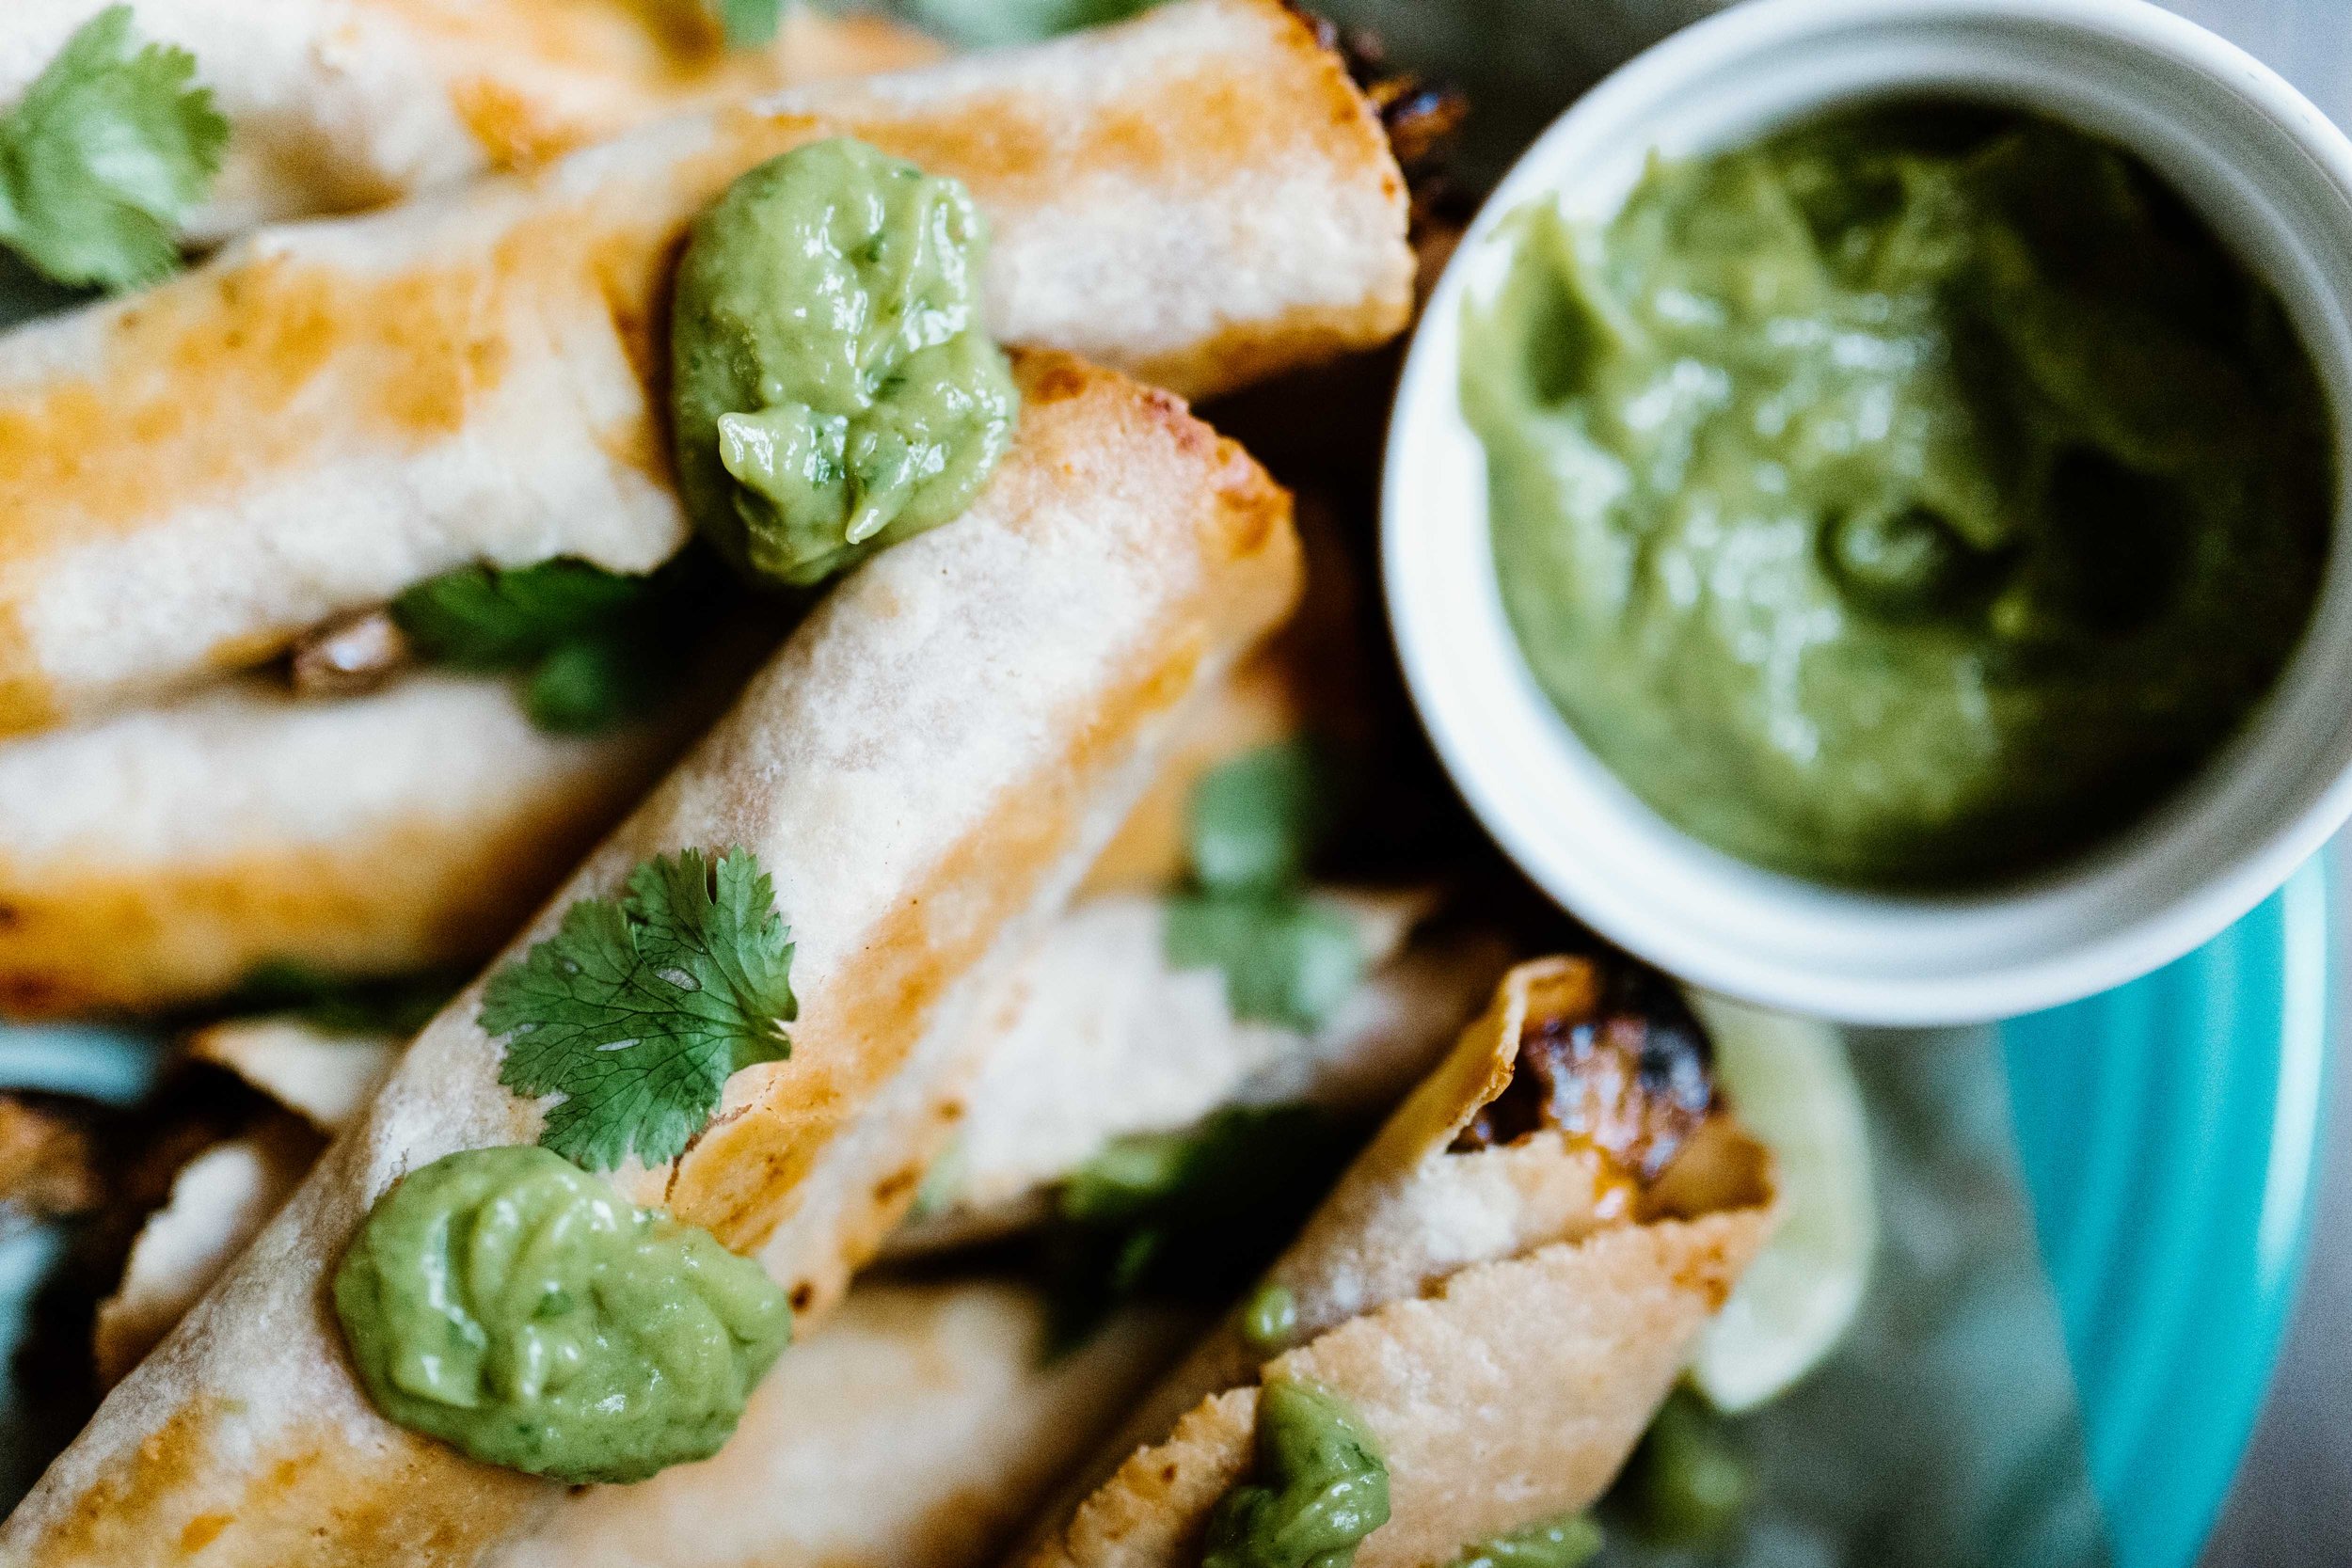 Ground turkey and vegetable taquitos can be served with salsa, sour cream, and avocado crema